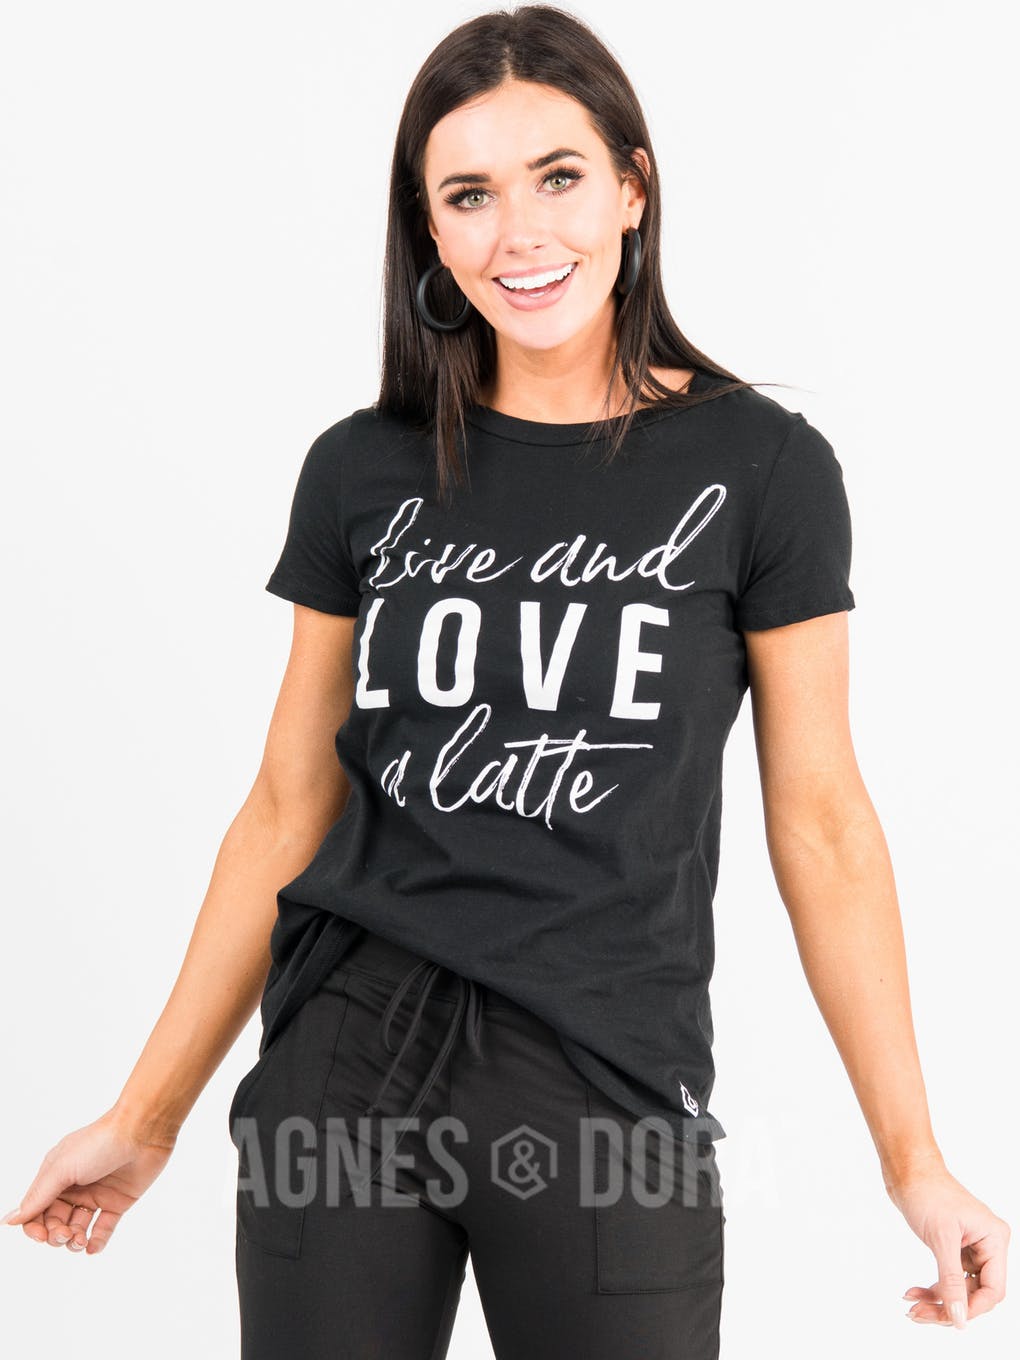 Graphic Tee Live and Love a Latte